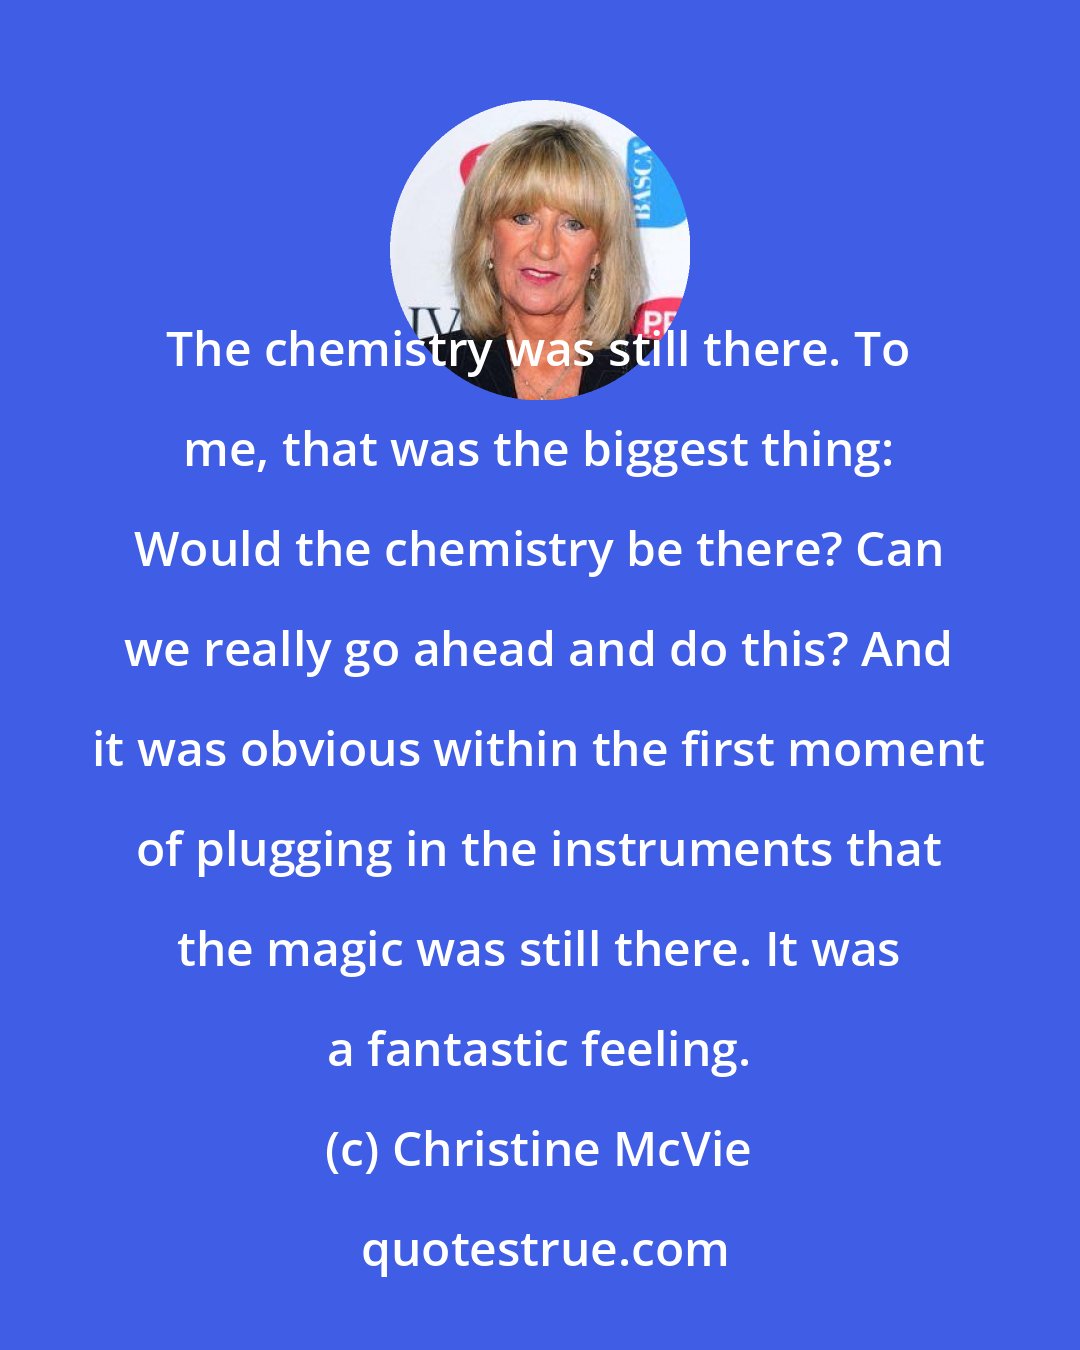 Christine McVie: The chemistry was still there. To me, that was the biggest thing: Would the chemistry be there? Can we really go ahead and do this? And it was obvious within the first moment of plugging in the instruments that the magic was still there. It was a fantastic feeling.